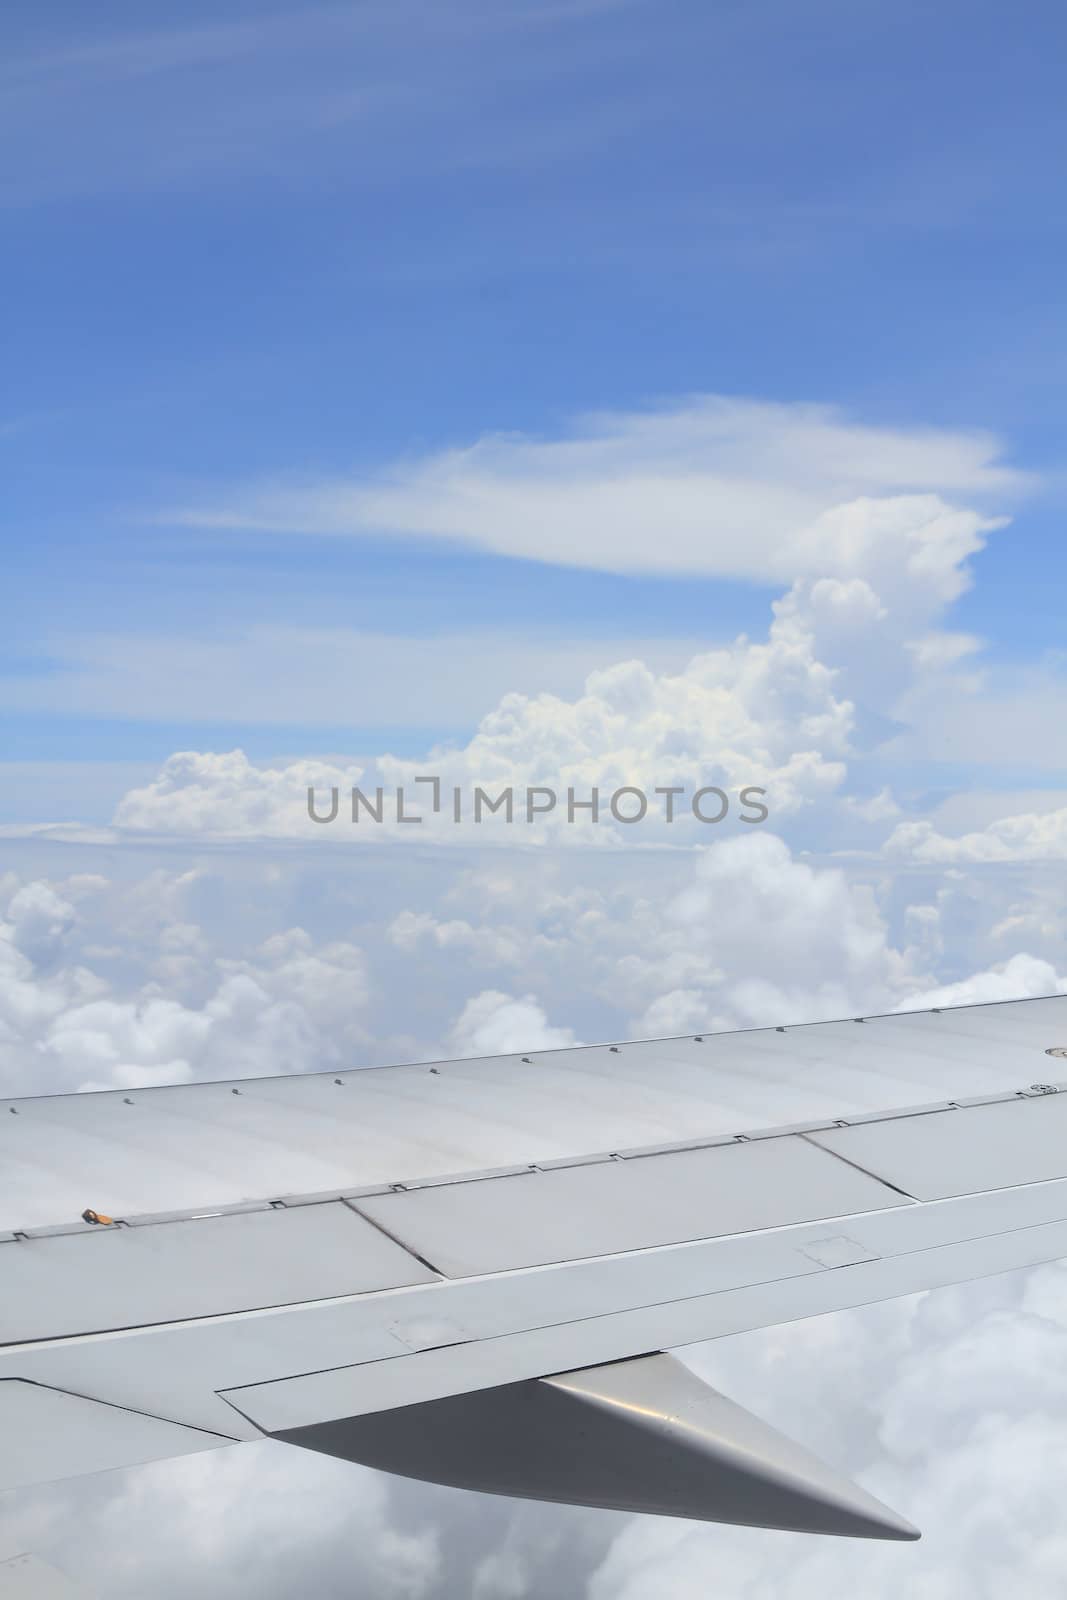 wing of the airplane under the clouds